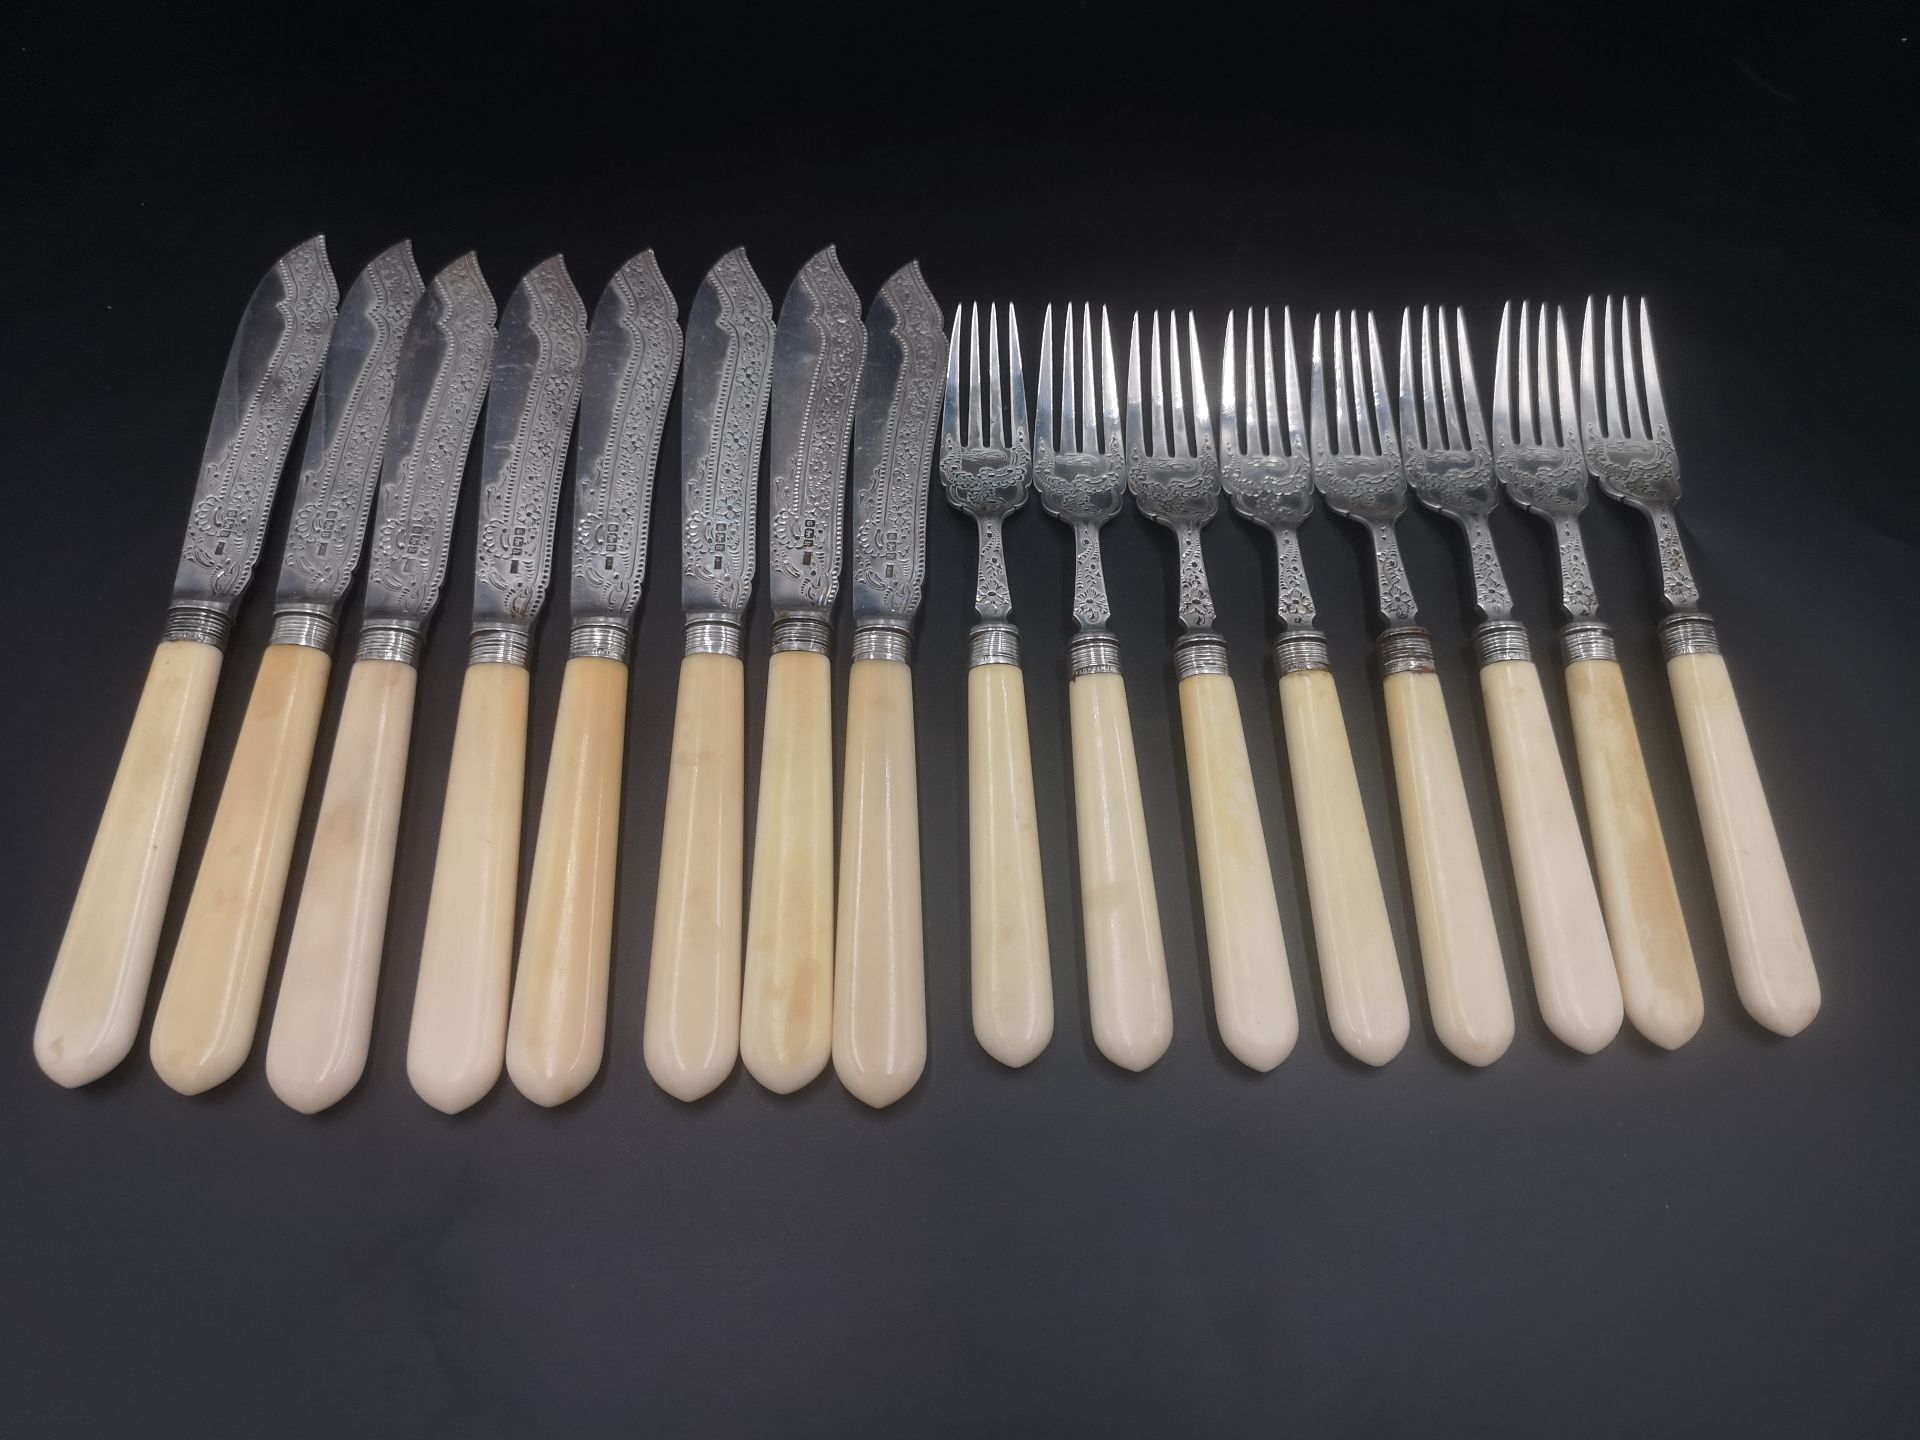 Eight place setting of fish knives and forks with silver blades and forks